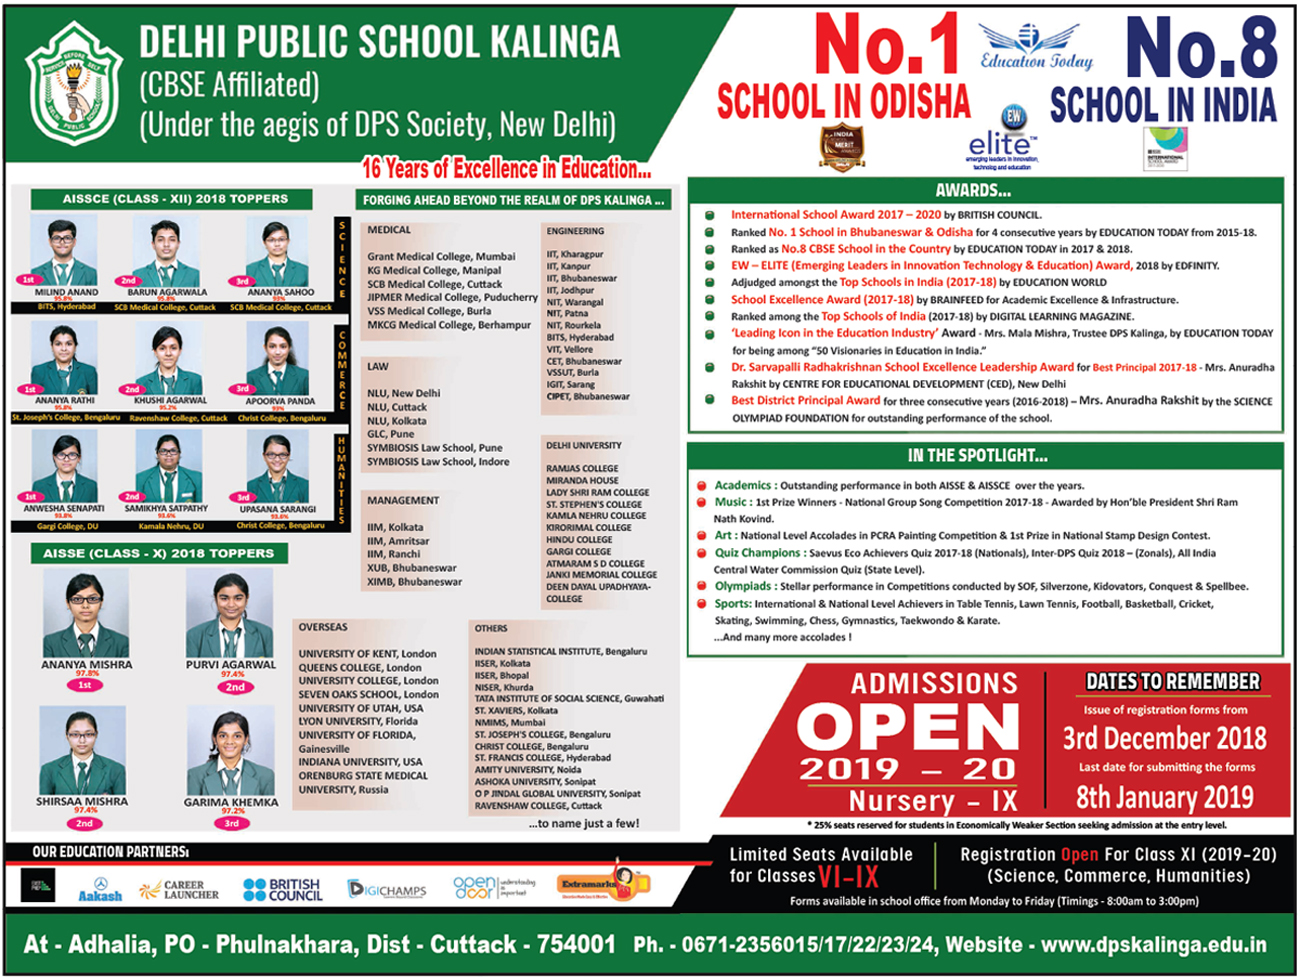 Admissions Open 2018-19